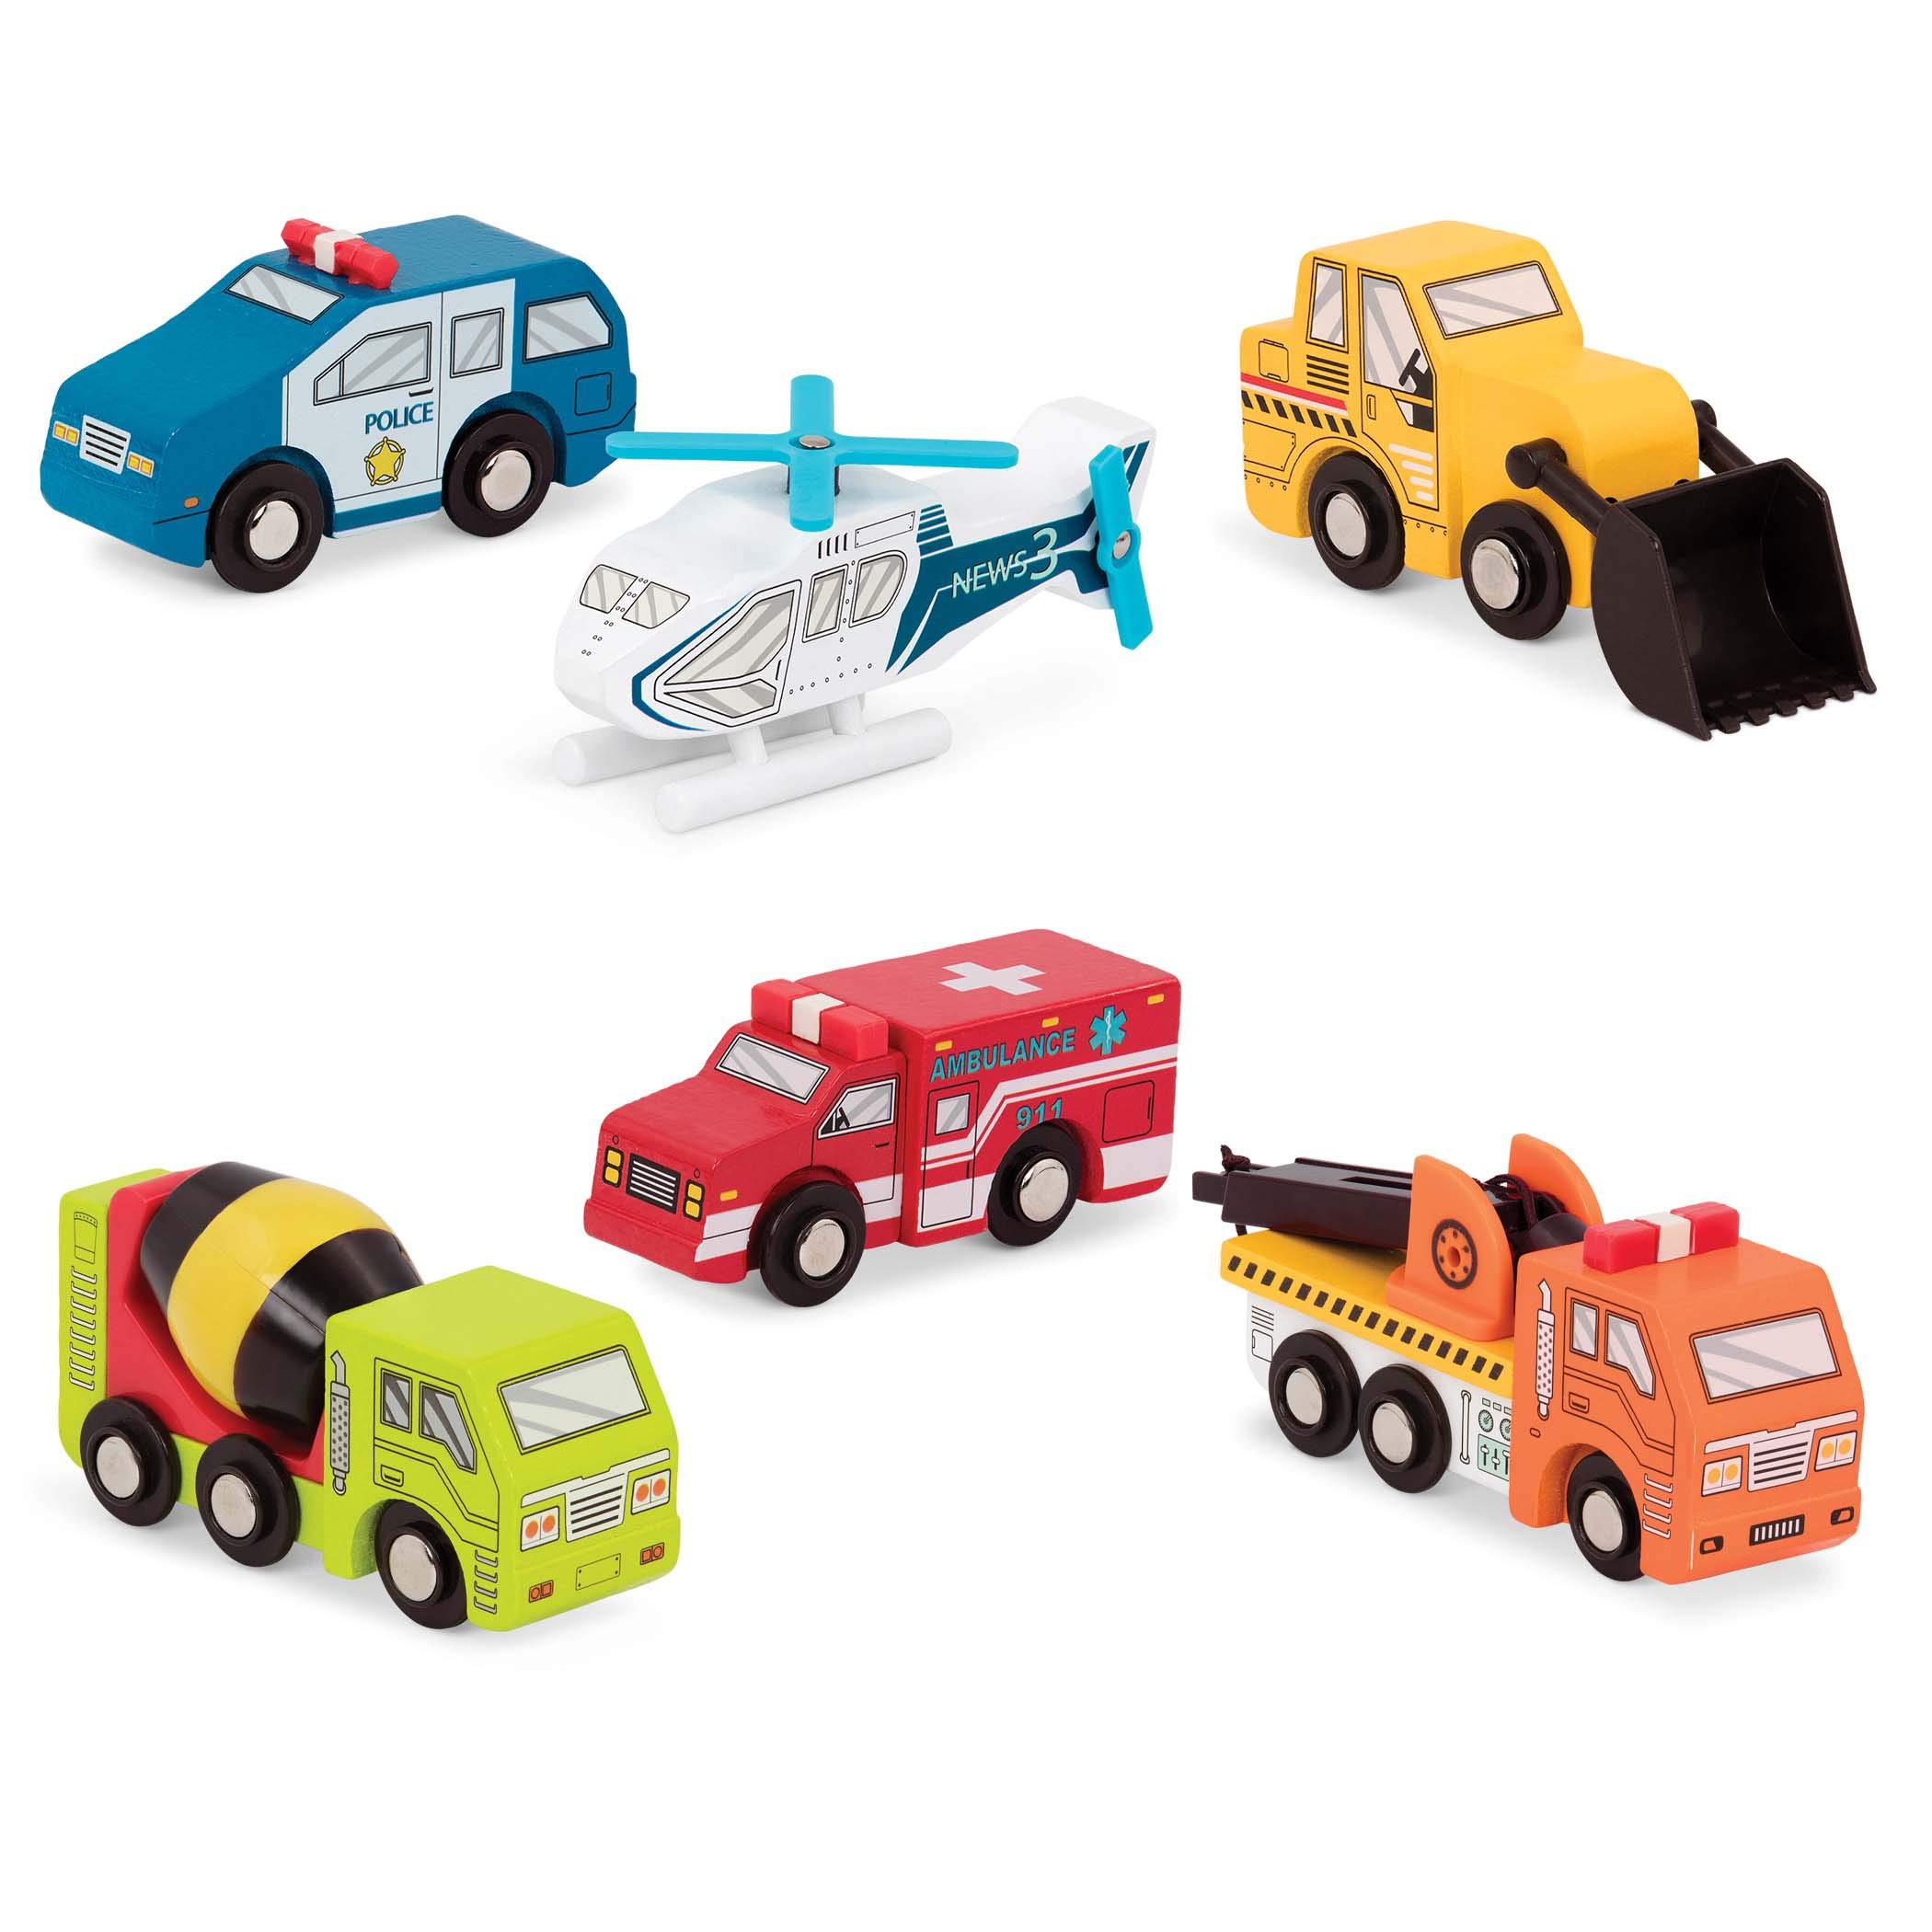 battat - wooden vehicles - miniature wooden toys, including toy cars, toy trucks, toy helicopter & ambulance, for kids age 3-